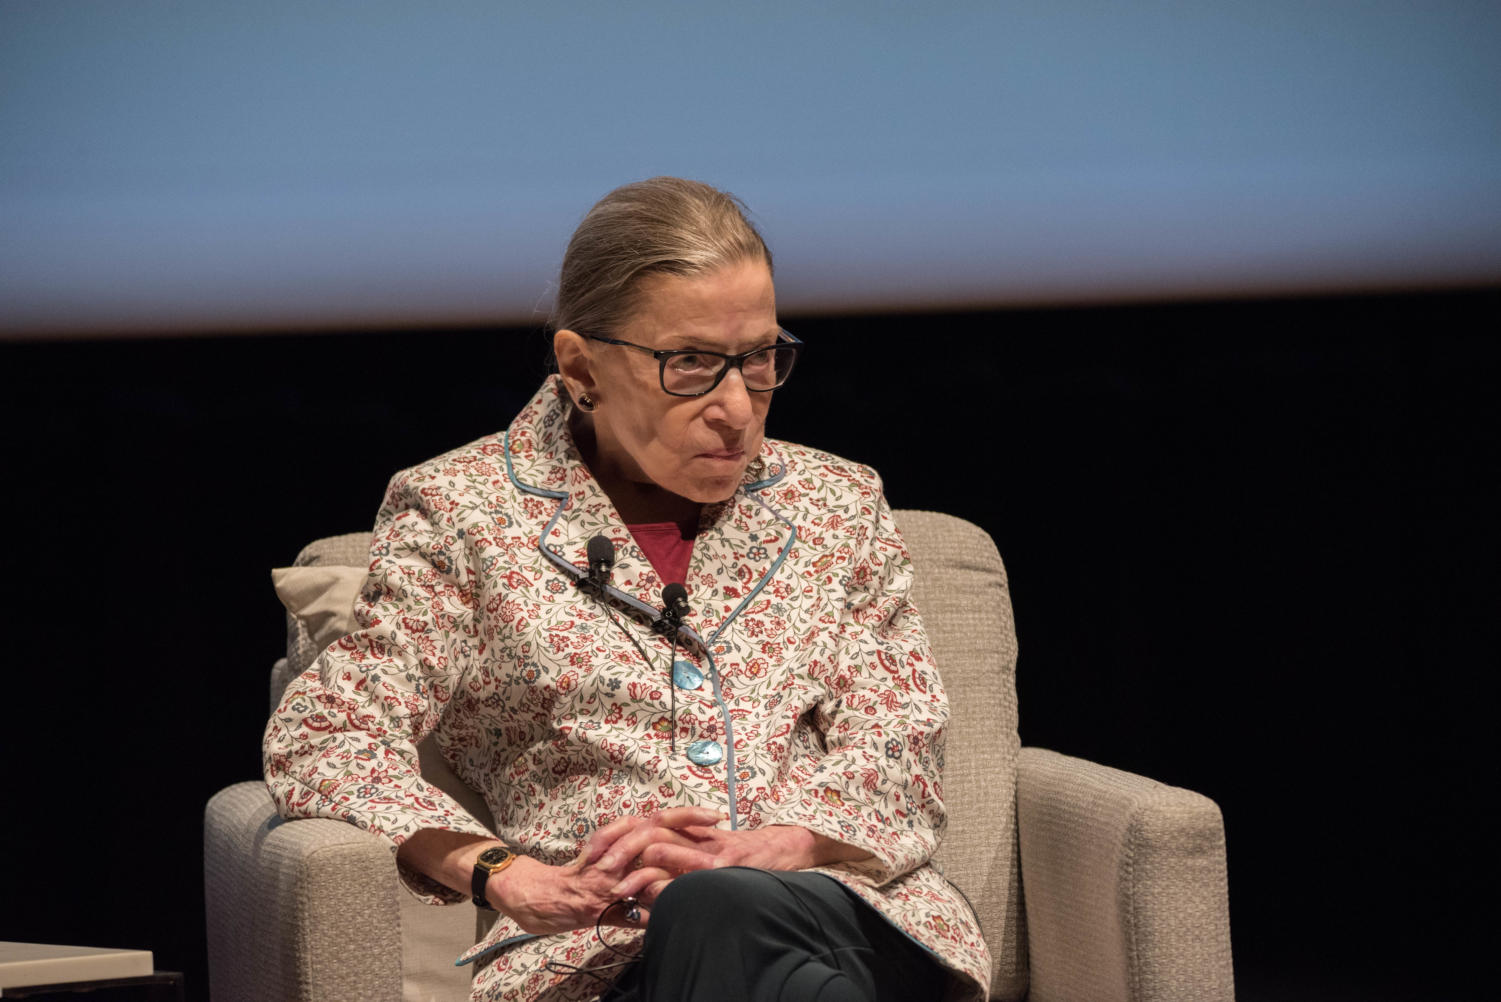 Supreme Court Justice Ruth Bader Ginsburg participates in a talk at the Logan Center for the Arts as part of her acceptance of the 2019 Harris Dean's Award.